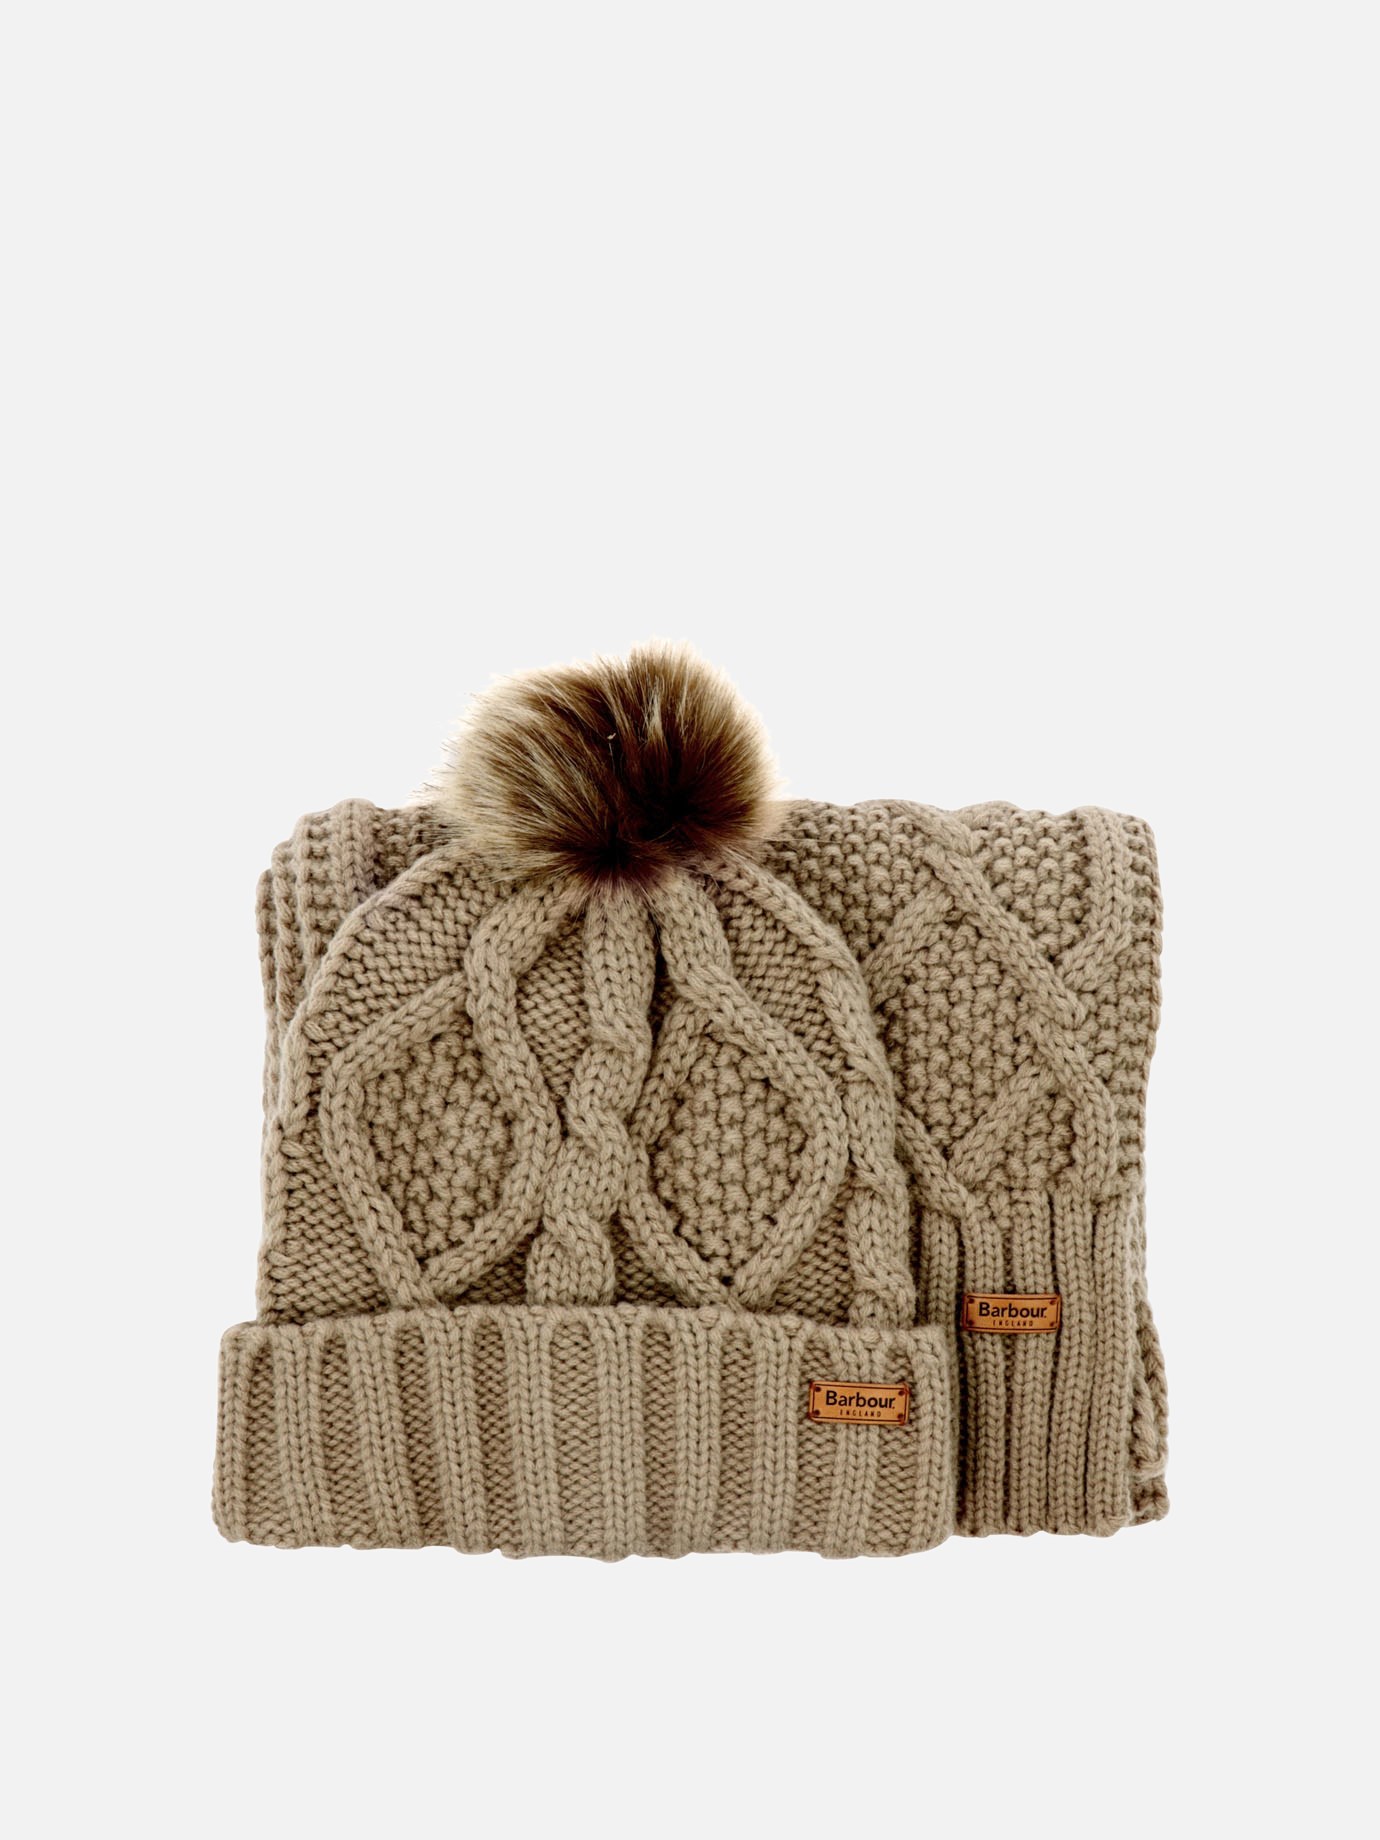  Ridley  beanie and scarf setby Barbour - 4